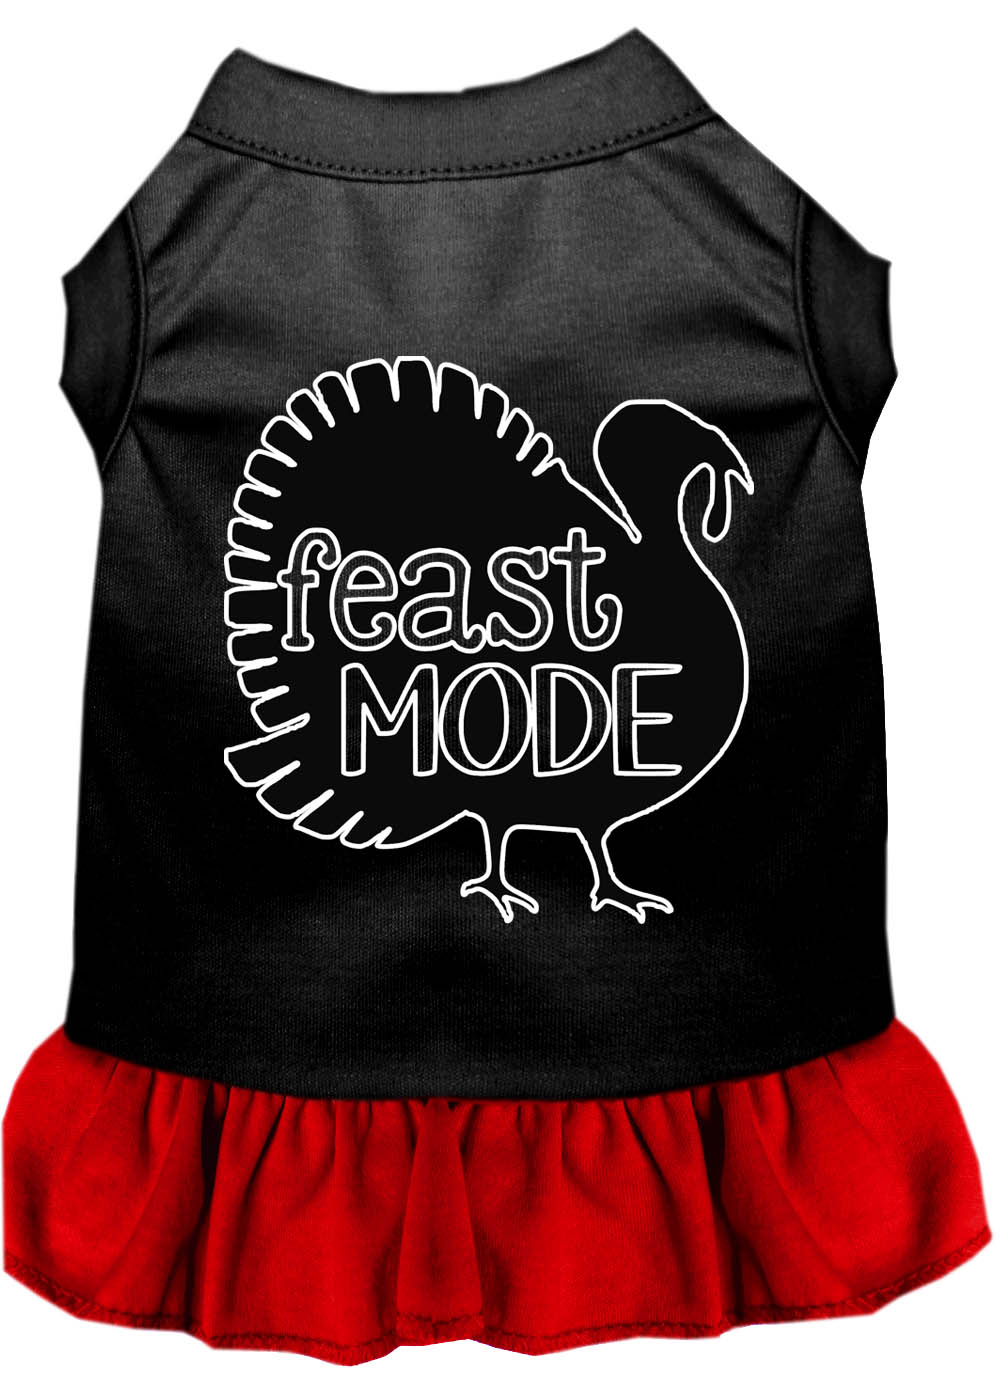 Feast Mode Screen Print Dog Dress Black with Red Med